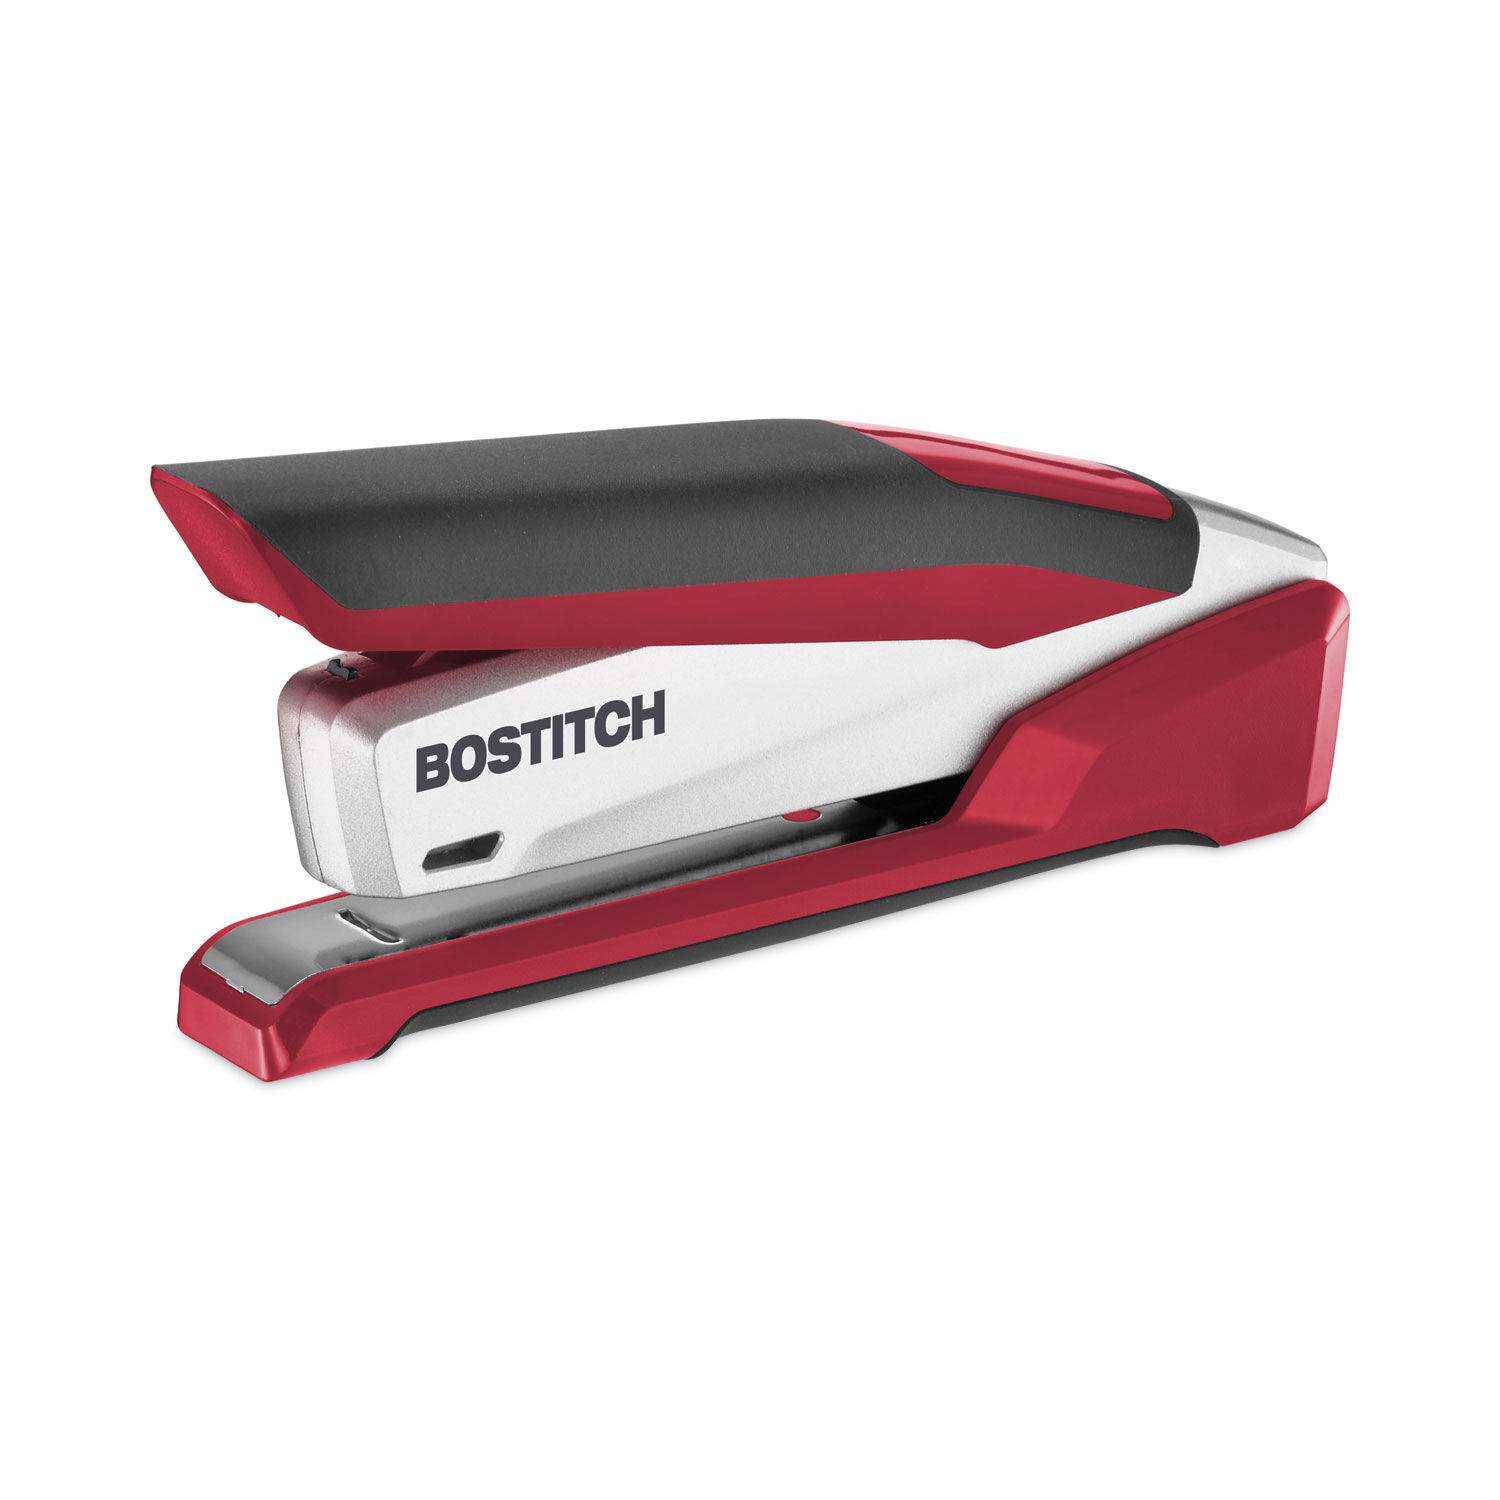 InPower Spring-Powered Desktop Stapler with Antimicrobial Protection 28-Sheet Capacity, Red/Silver